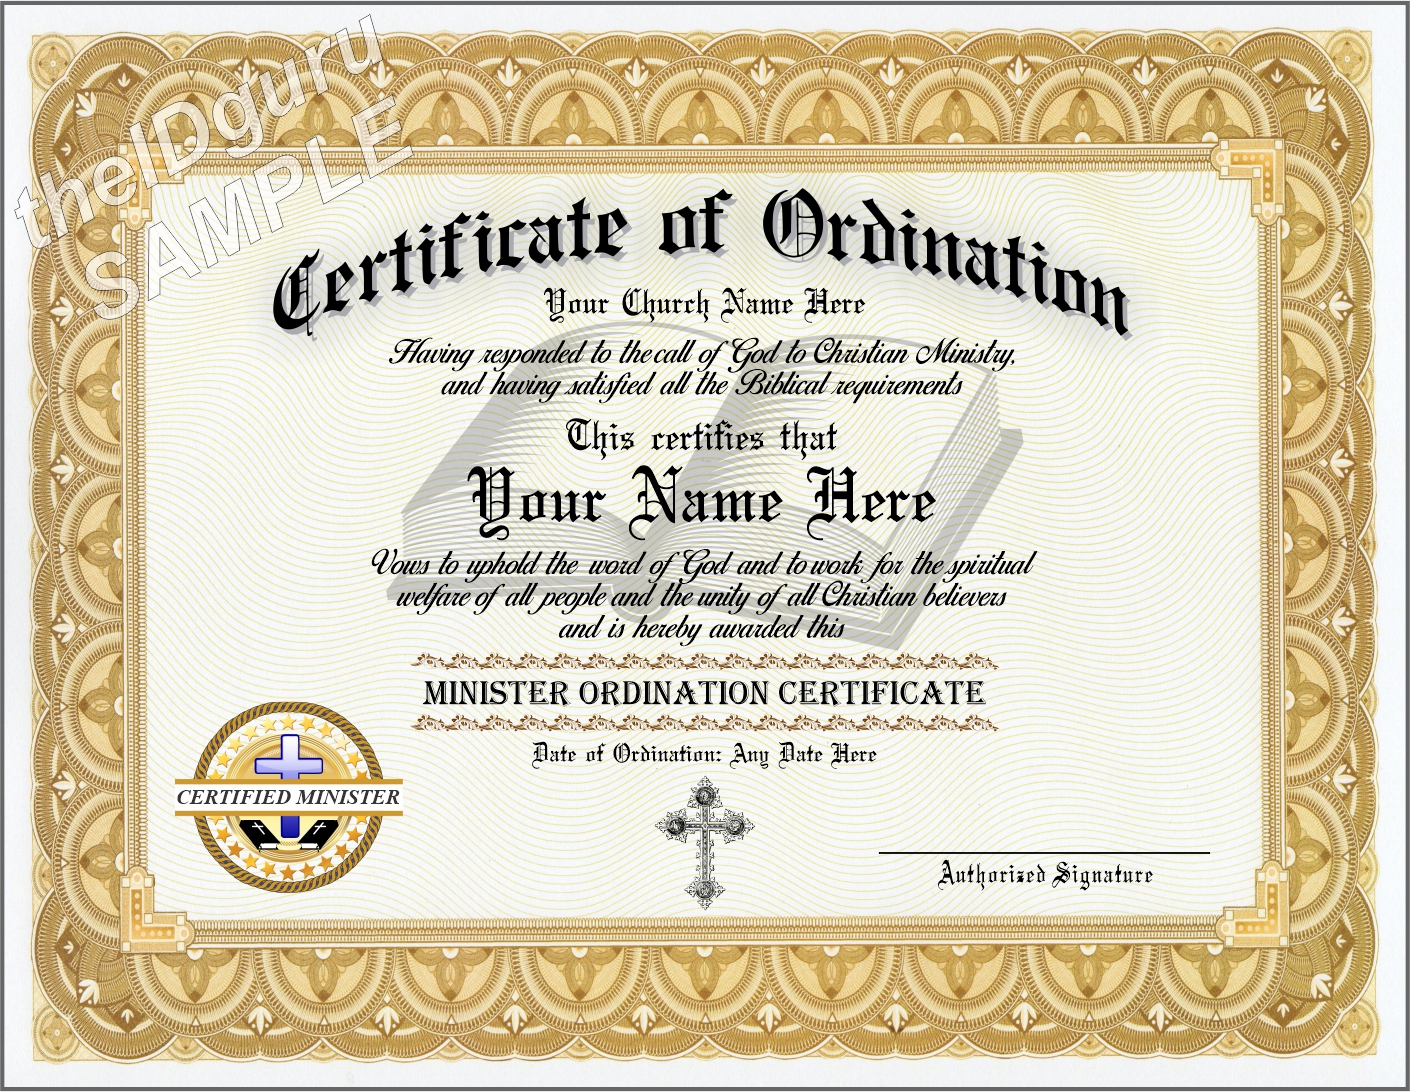 Ordained MINISTER Certificate Custom Printed With Your Information And Church LOGO The Id Guru